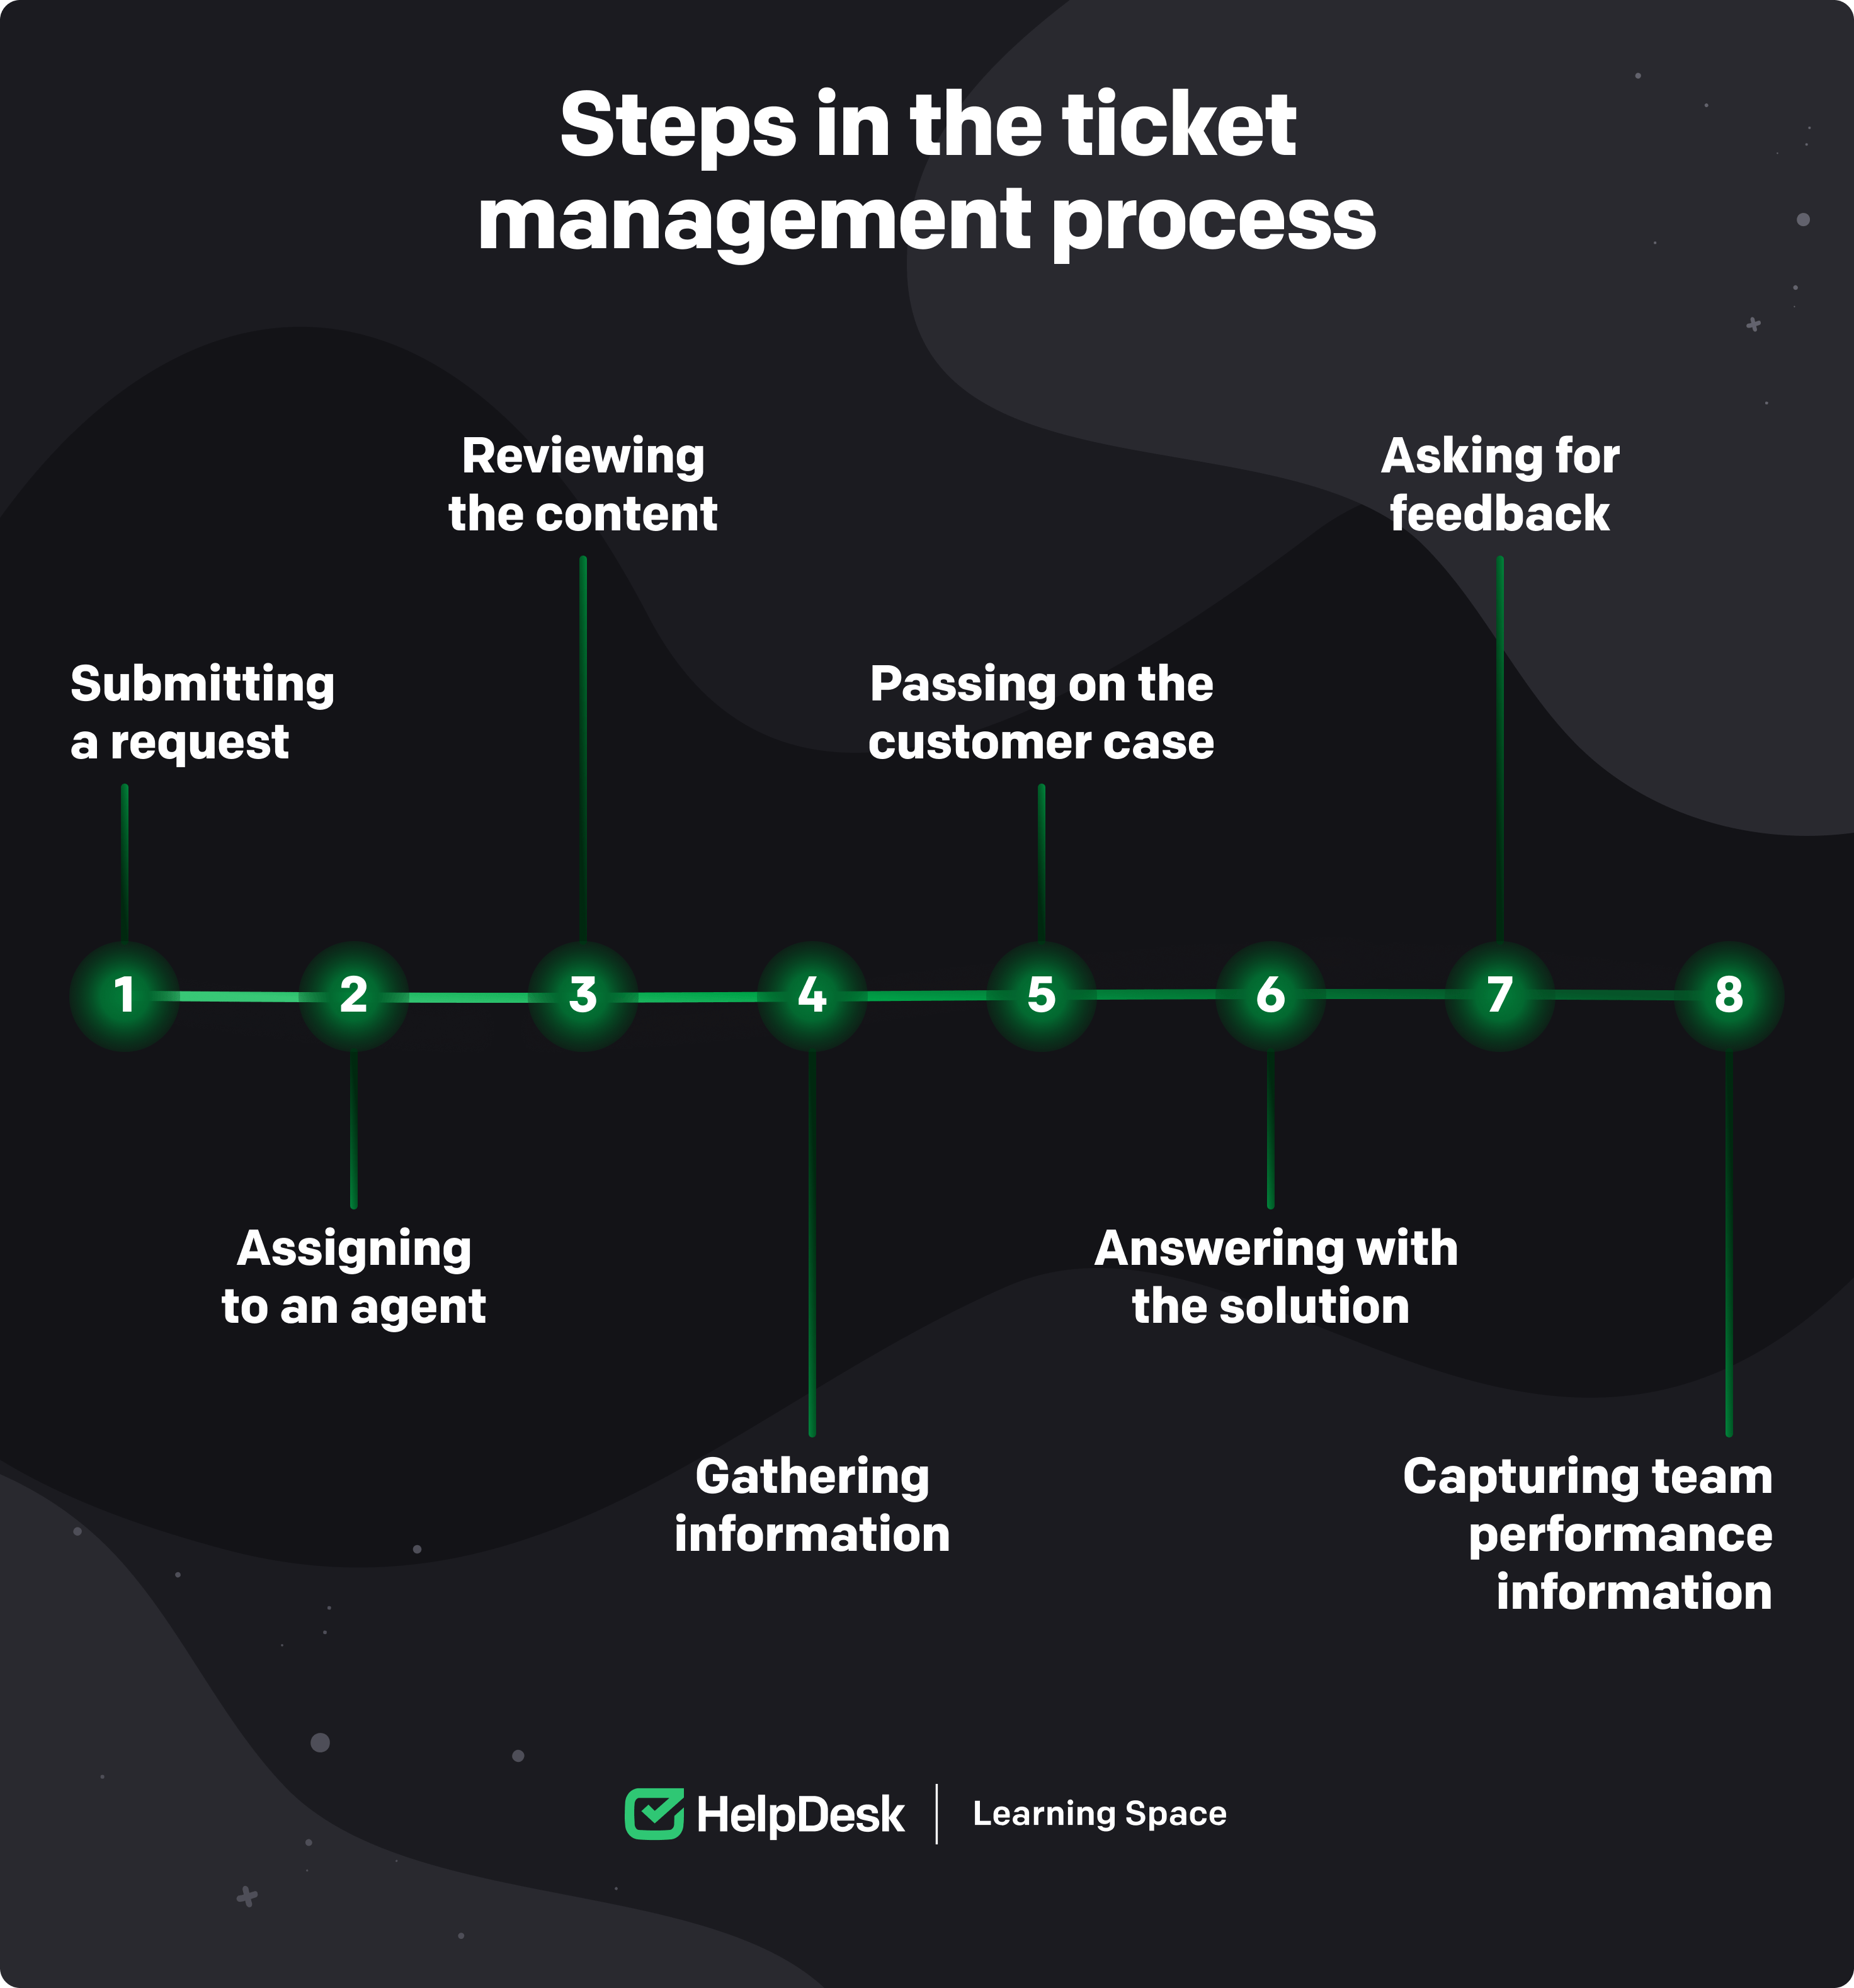 Steps in the ticket management process